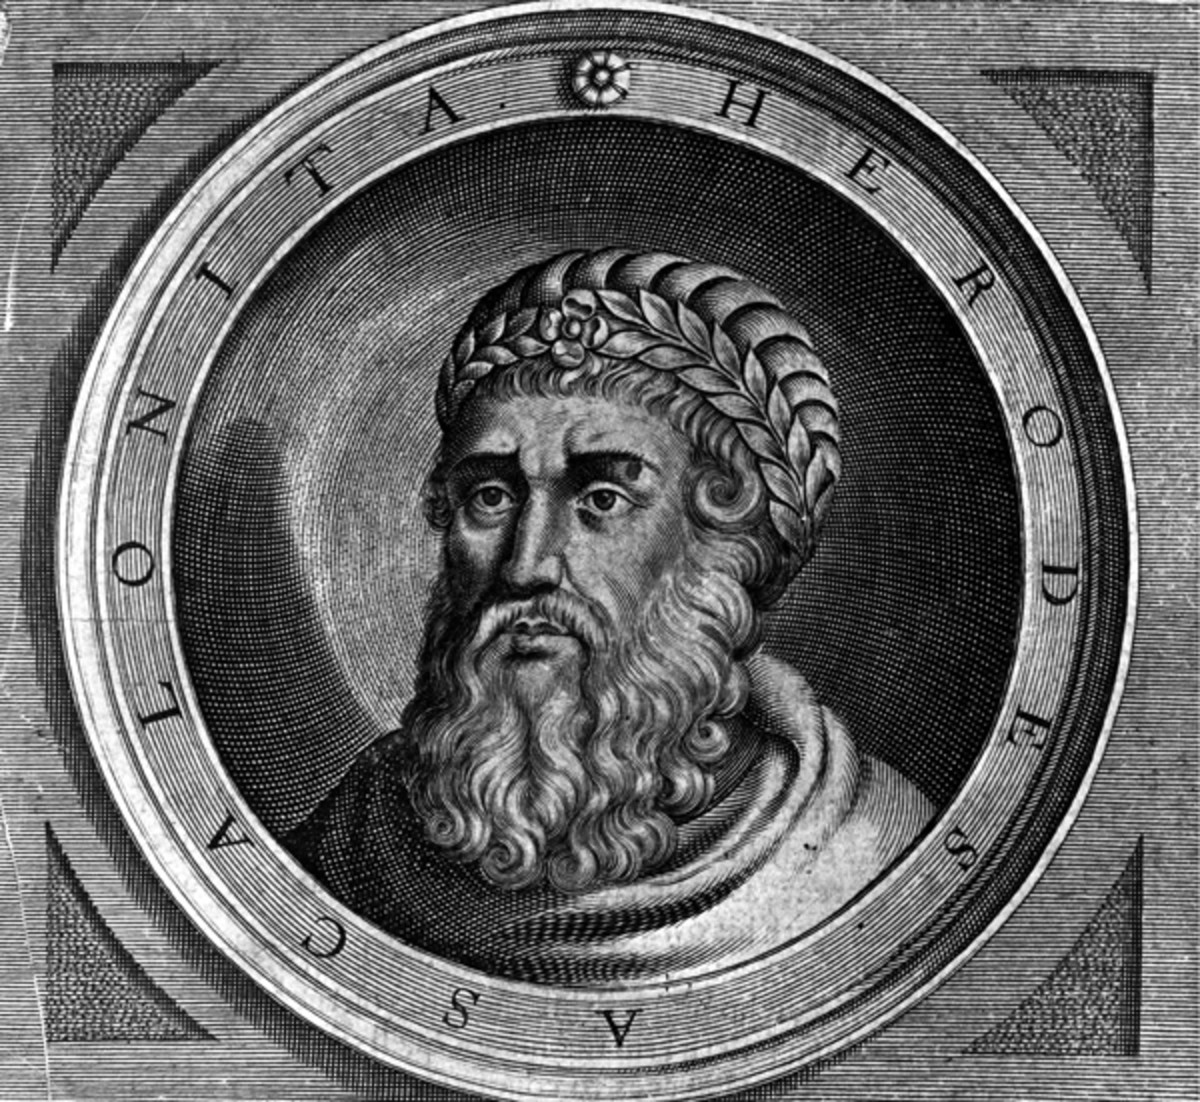 Herod the Great, “King of the Jews”